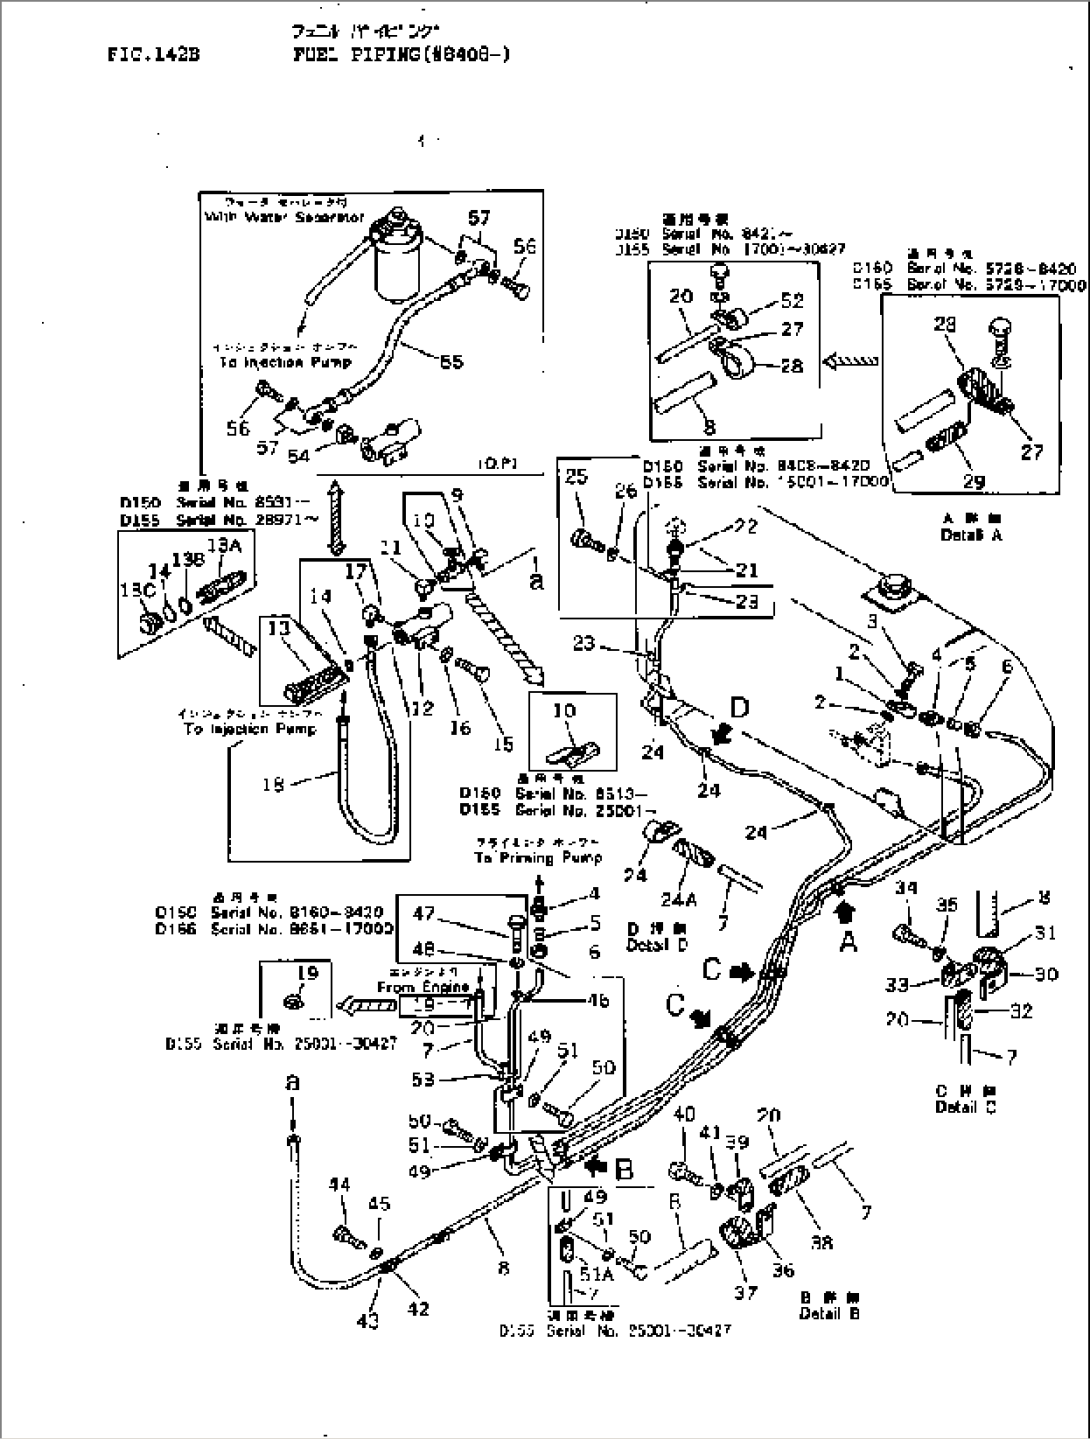 FUEL PIPING(#8408-)